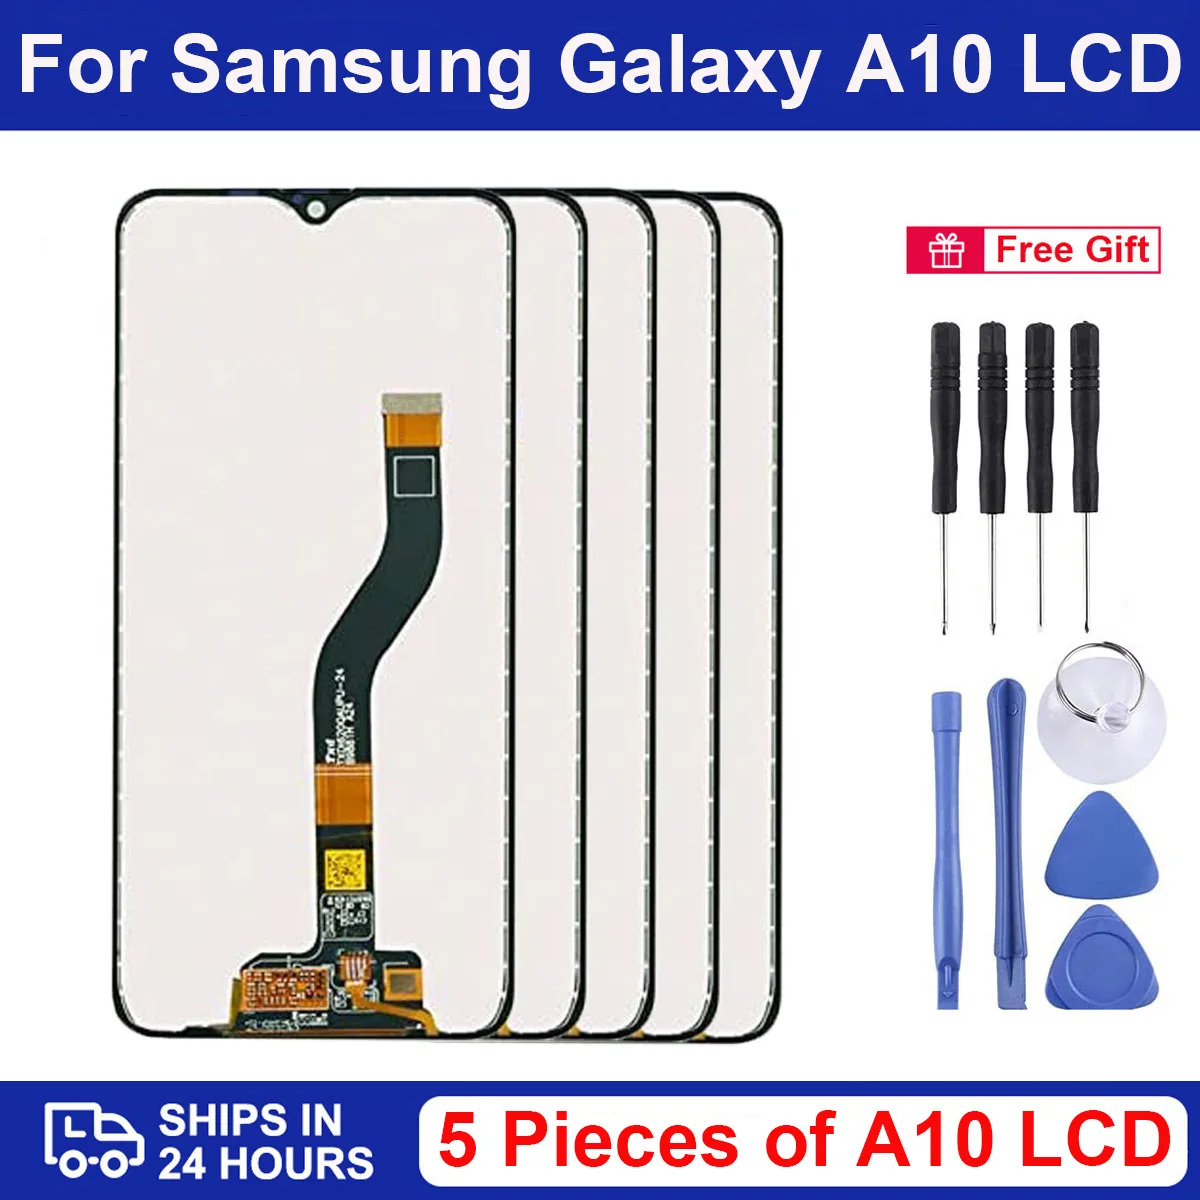 

Wholesale a10 Display For Samsung Galaxy A10 lcd A105 SM-A105/DS A105F A105FD m10 LCD and Touch Screen Digitizer Assembly Parts